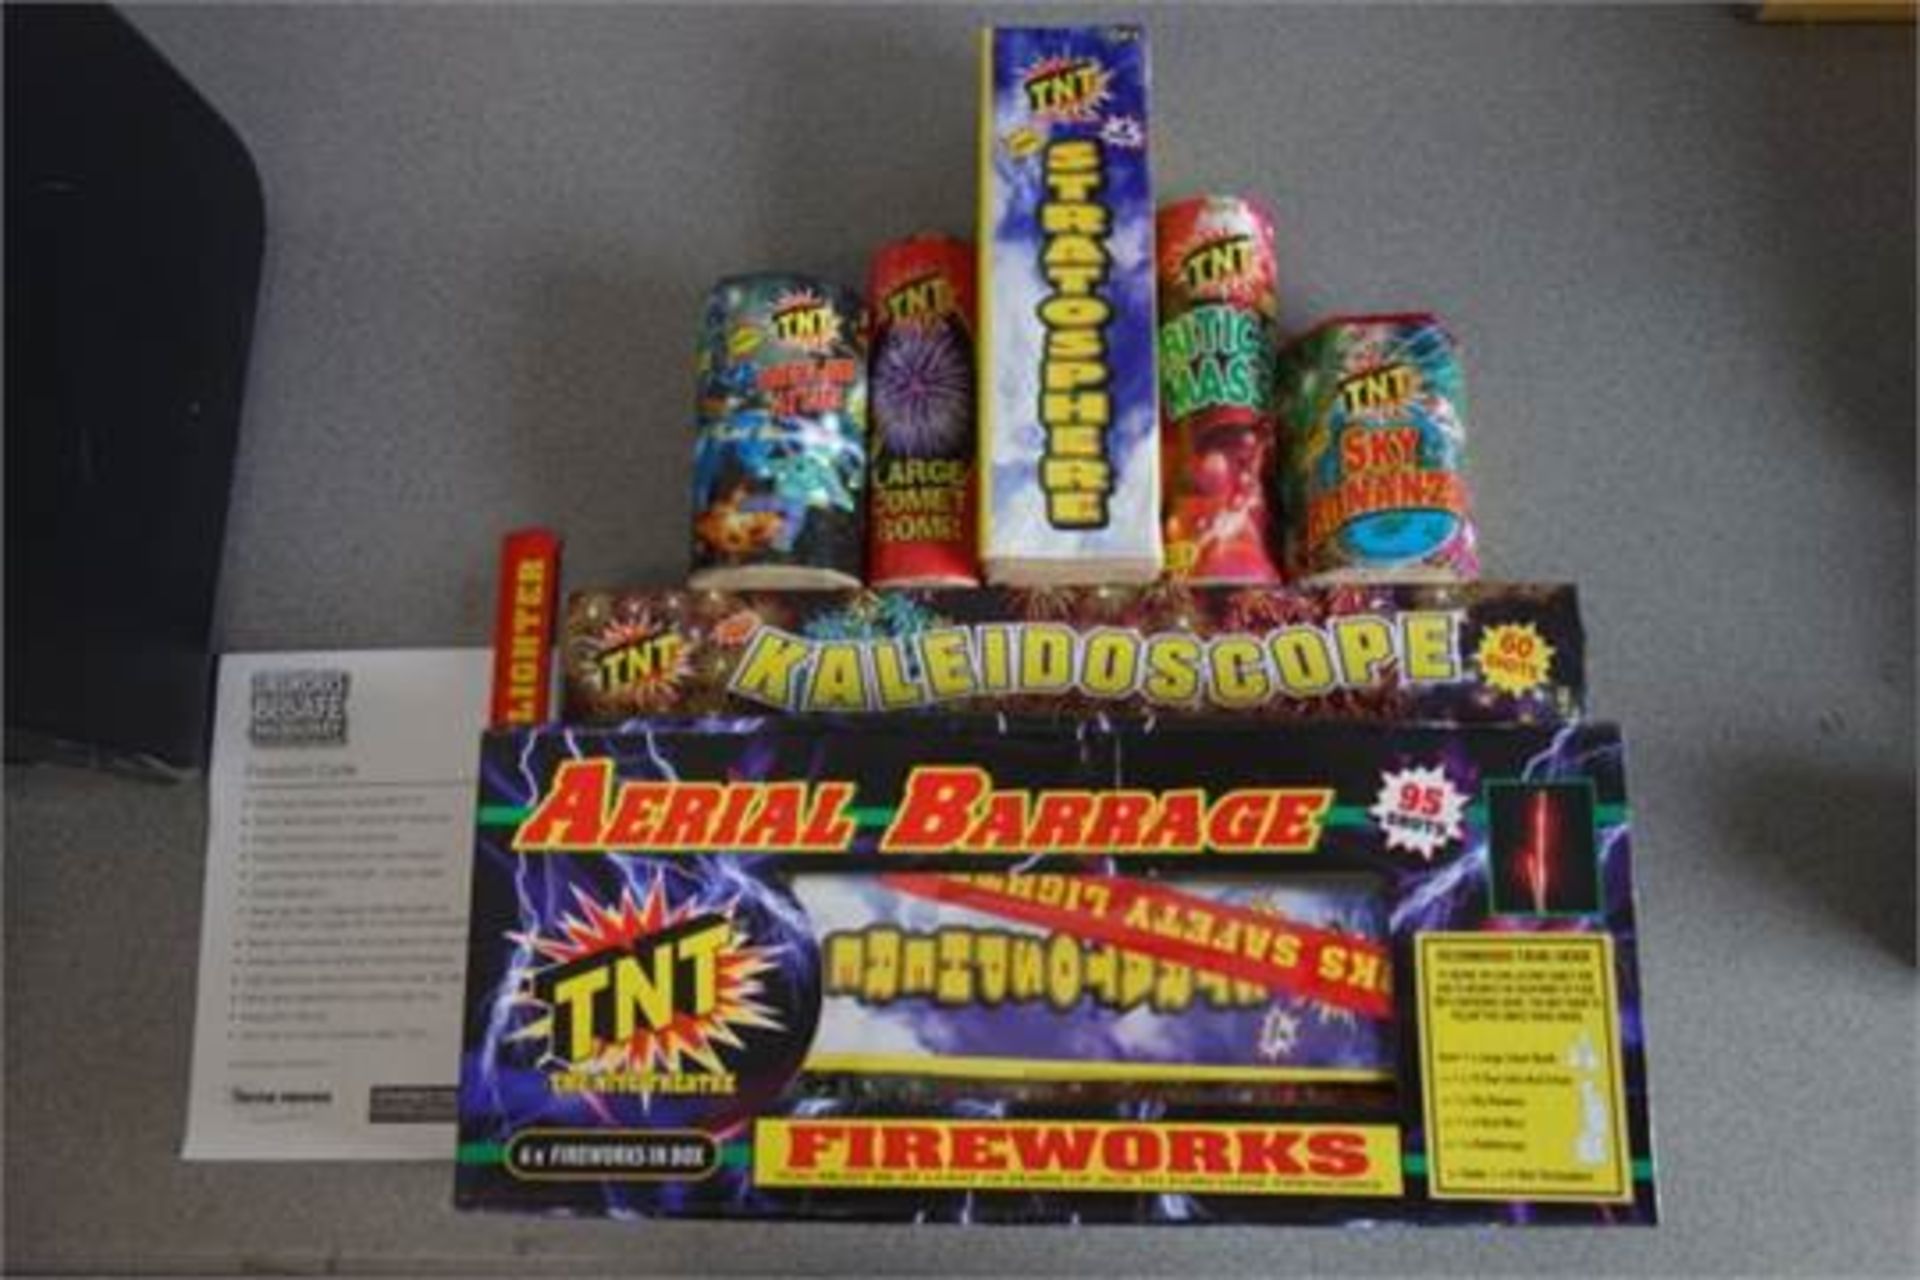 4 x TNT Fireworks - Aerial Barrage 95 Shot Selection Box. Includes 6 high quality fireworks. 1 x - Image 3 of 3